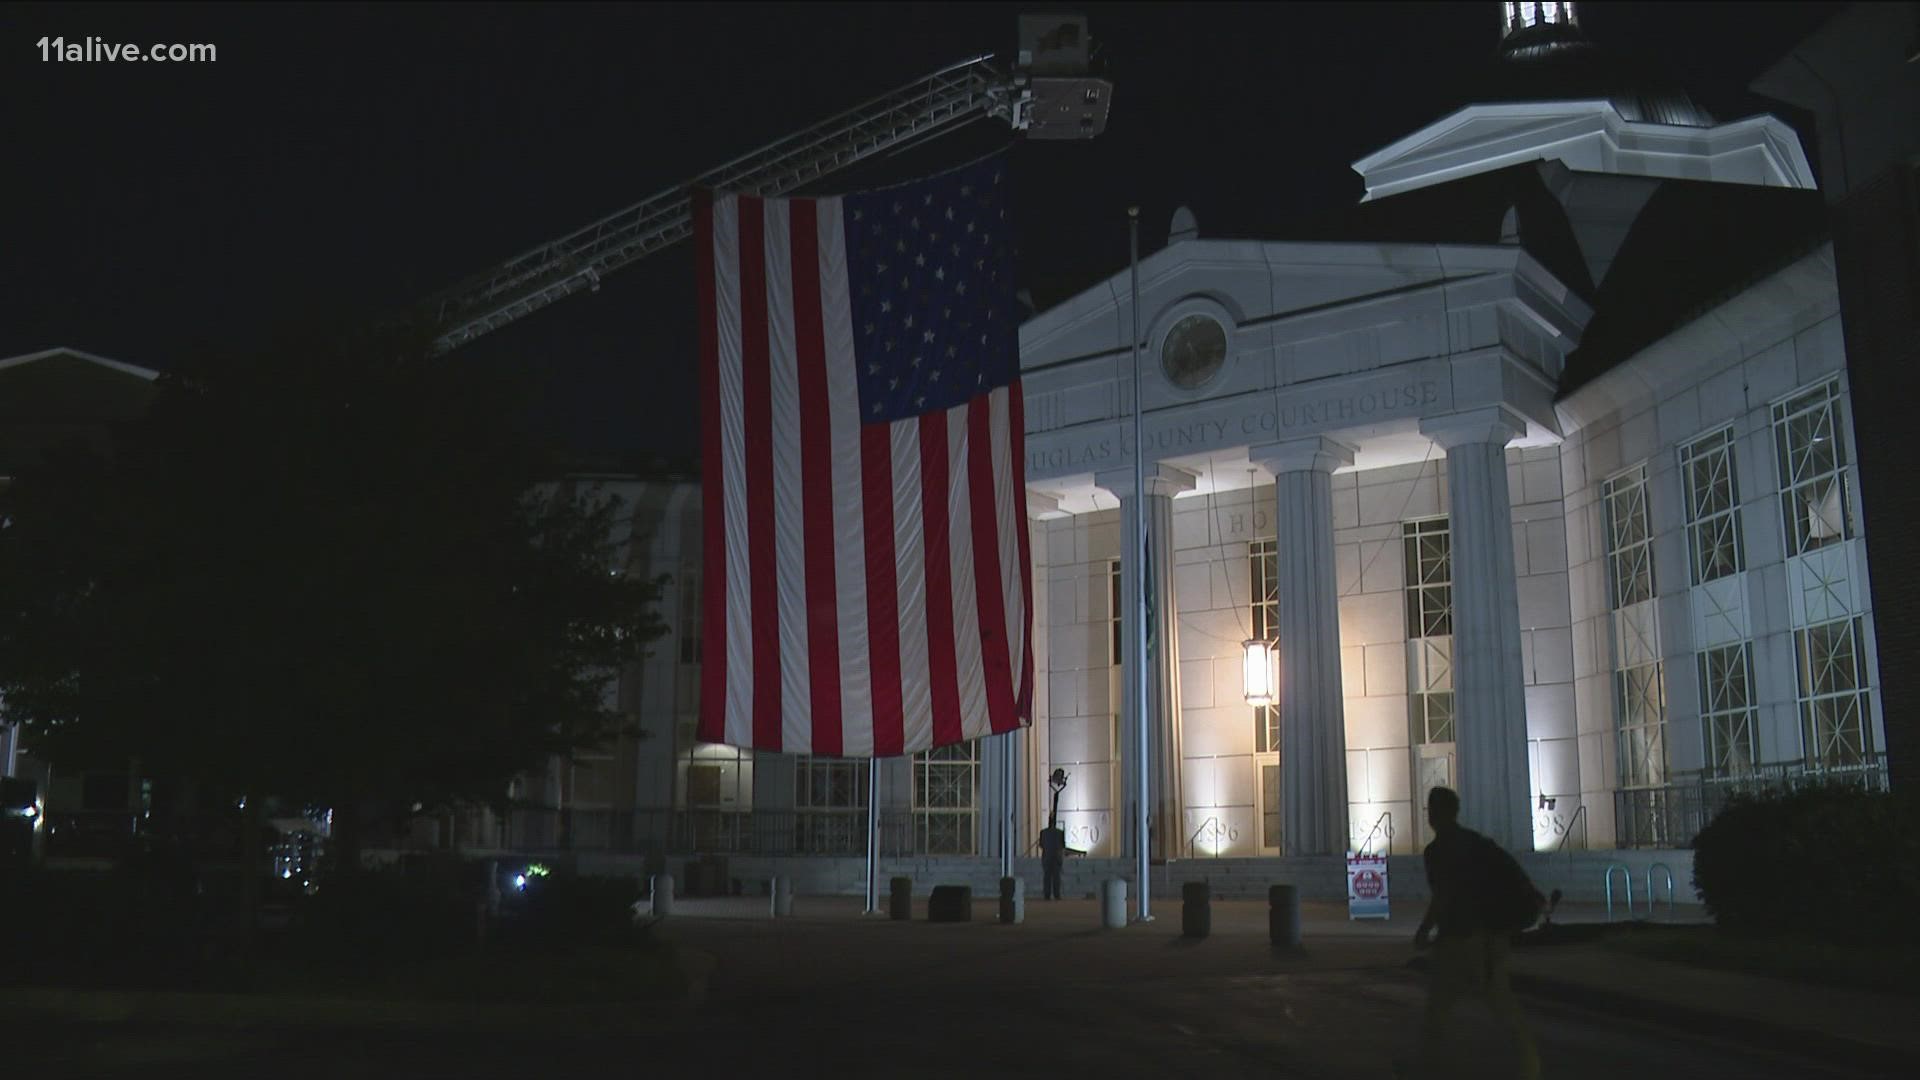 20 years since 9/11 is being marked around Atlanta and the nation this morning.